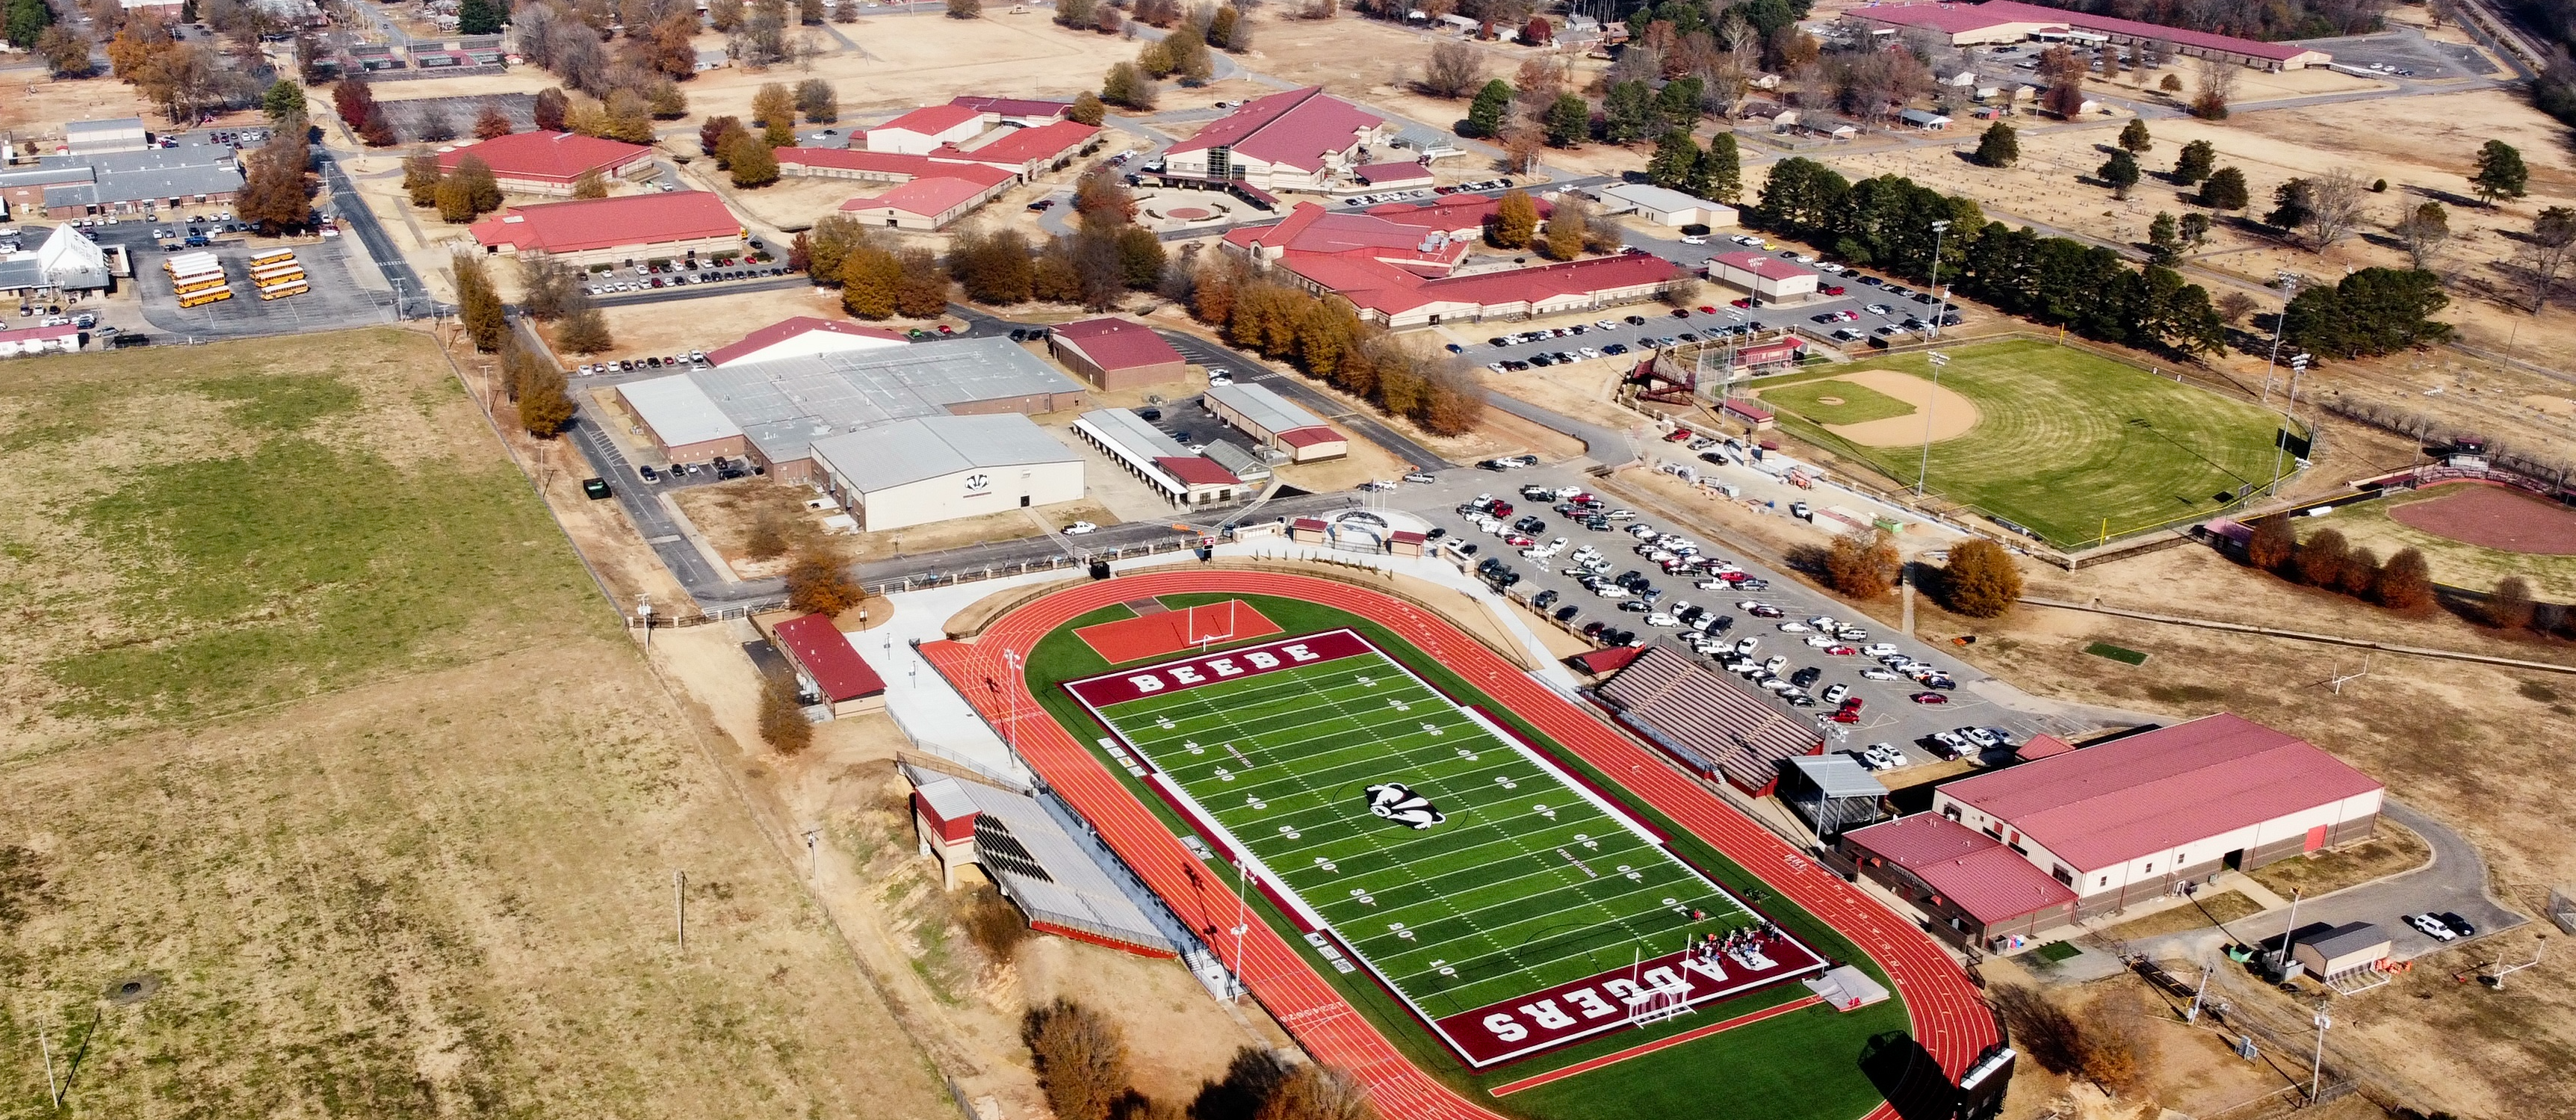 Aerial view of high school